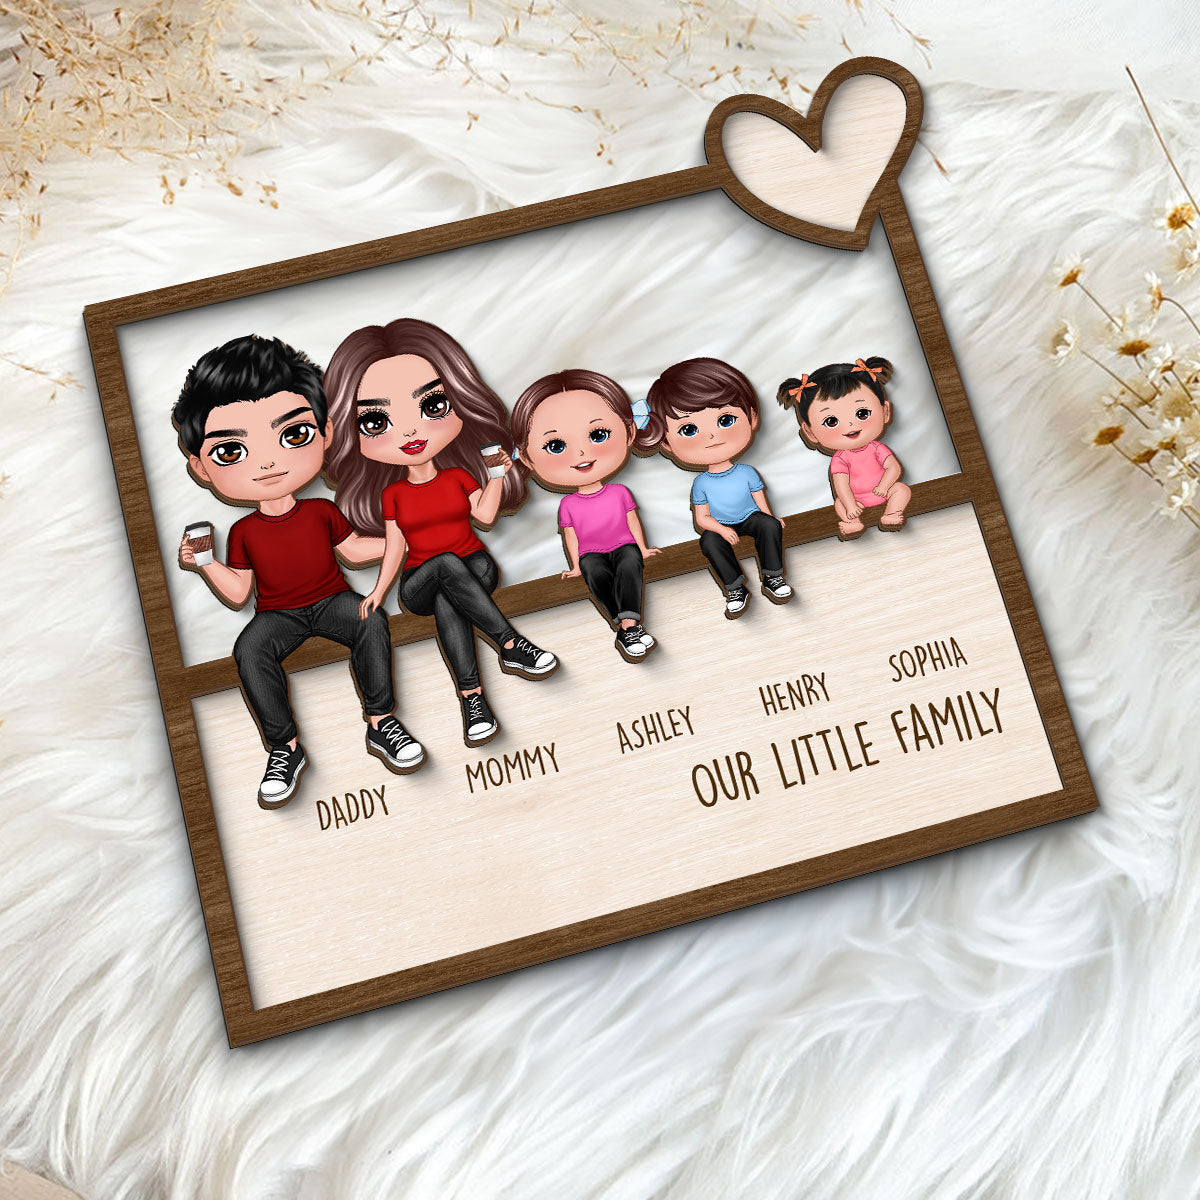 Family Sitting Together Home Decor Housewarming Gift Personalized 2-Layer Wooden Plaque